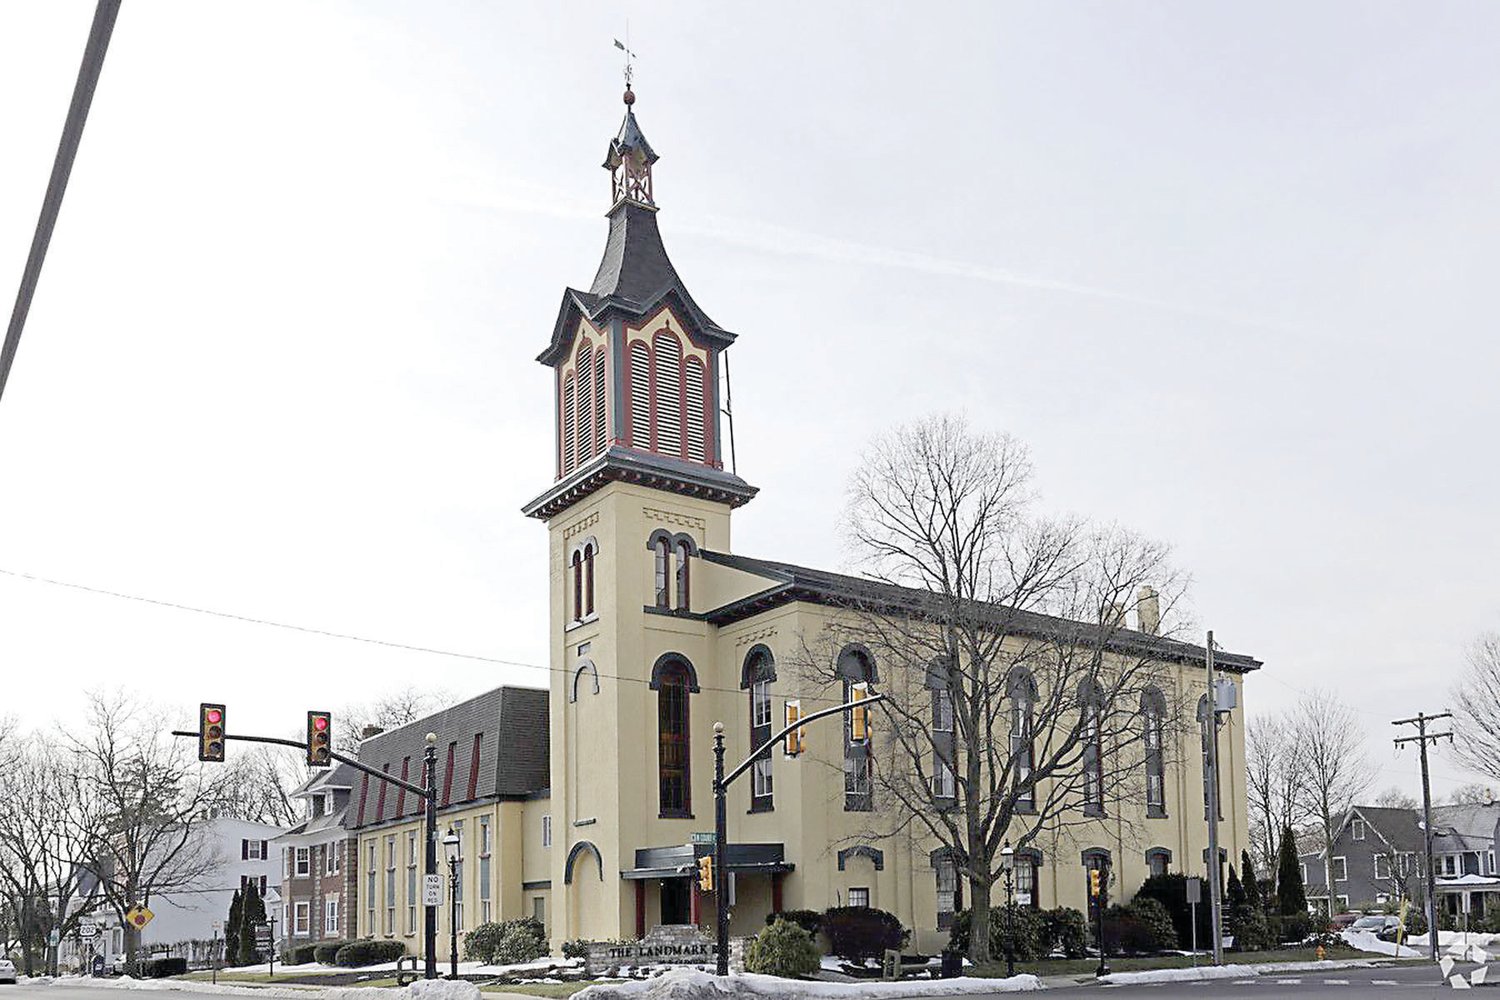 The Landmark Building in Doylestown was home to First Baptist Church from 1868-1967.